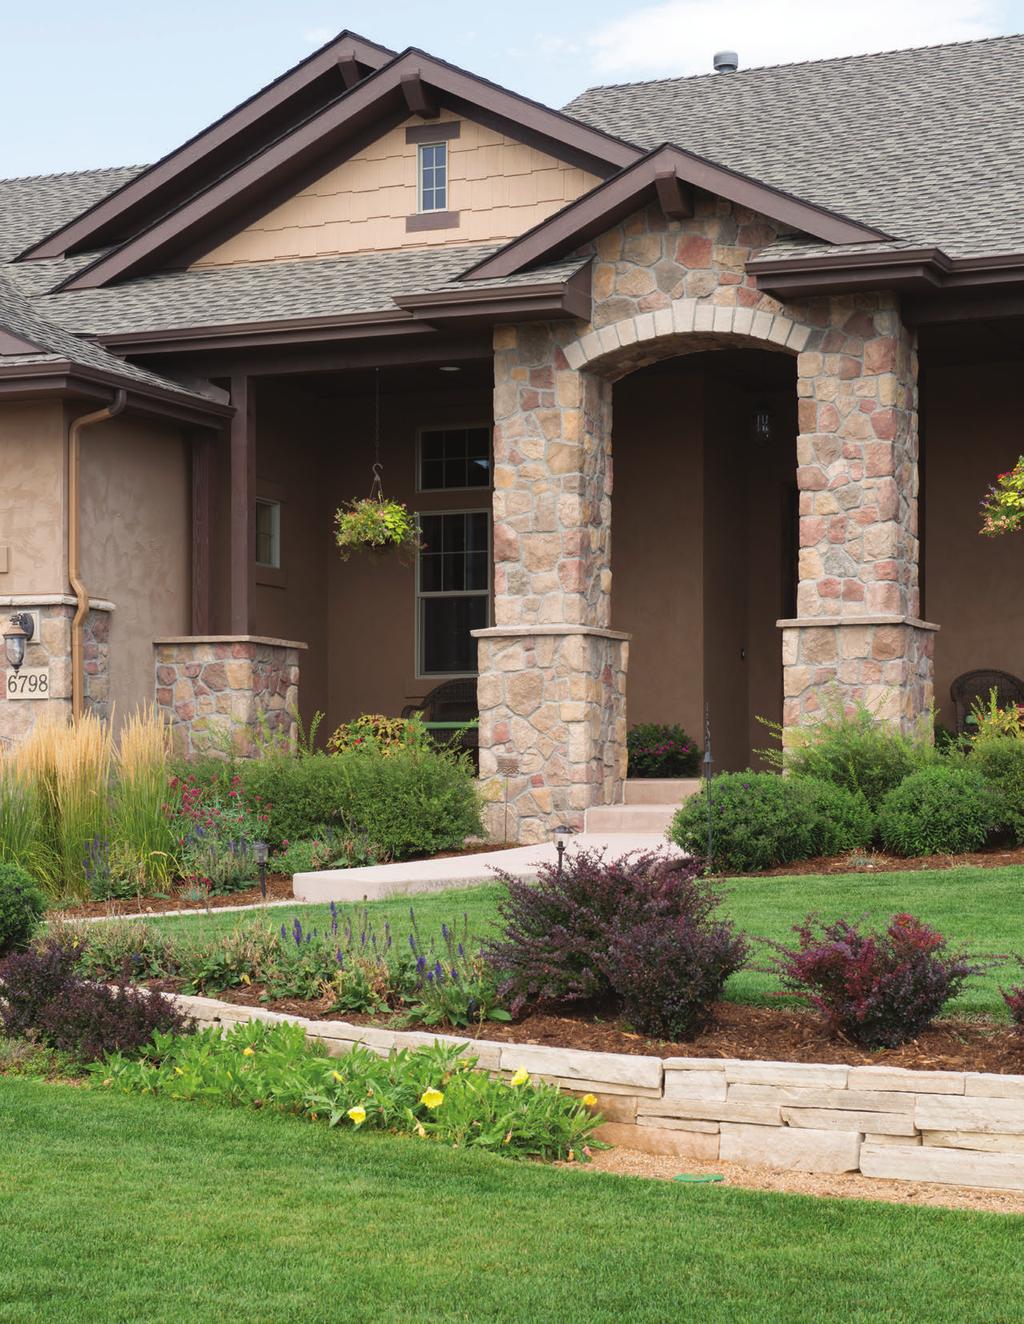 From rugged Fieldstone to sleek Easy Fit Savannah Ledge, ProStone veneer offers a sophisticated look you can feel good about from every angle.